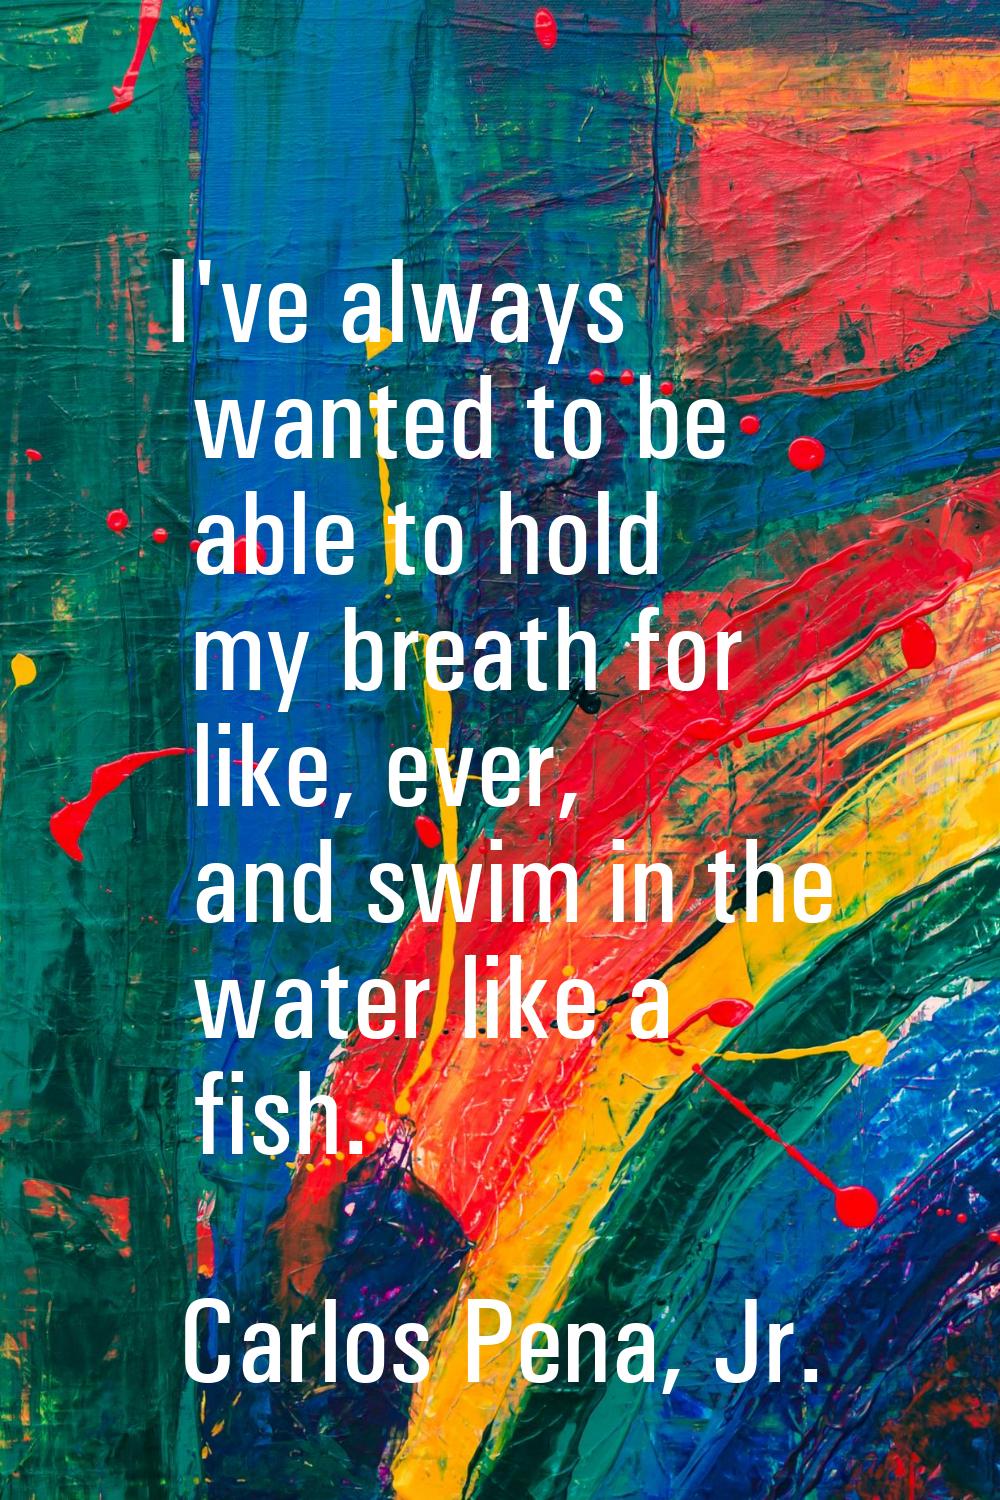 I've always wanted to be able to hold my breath for like, ever, and swim in the water like a fish.